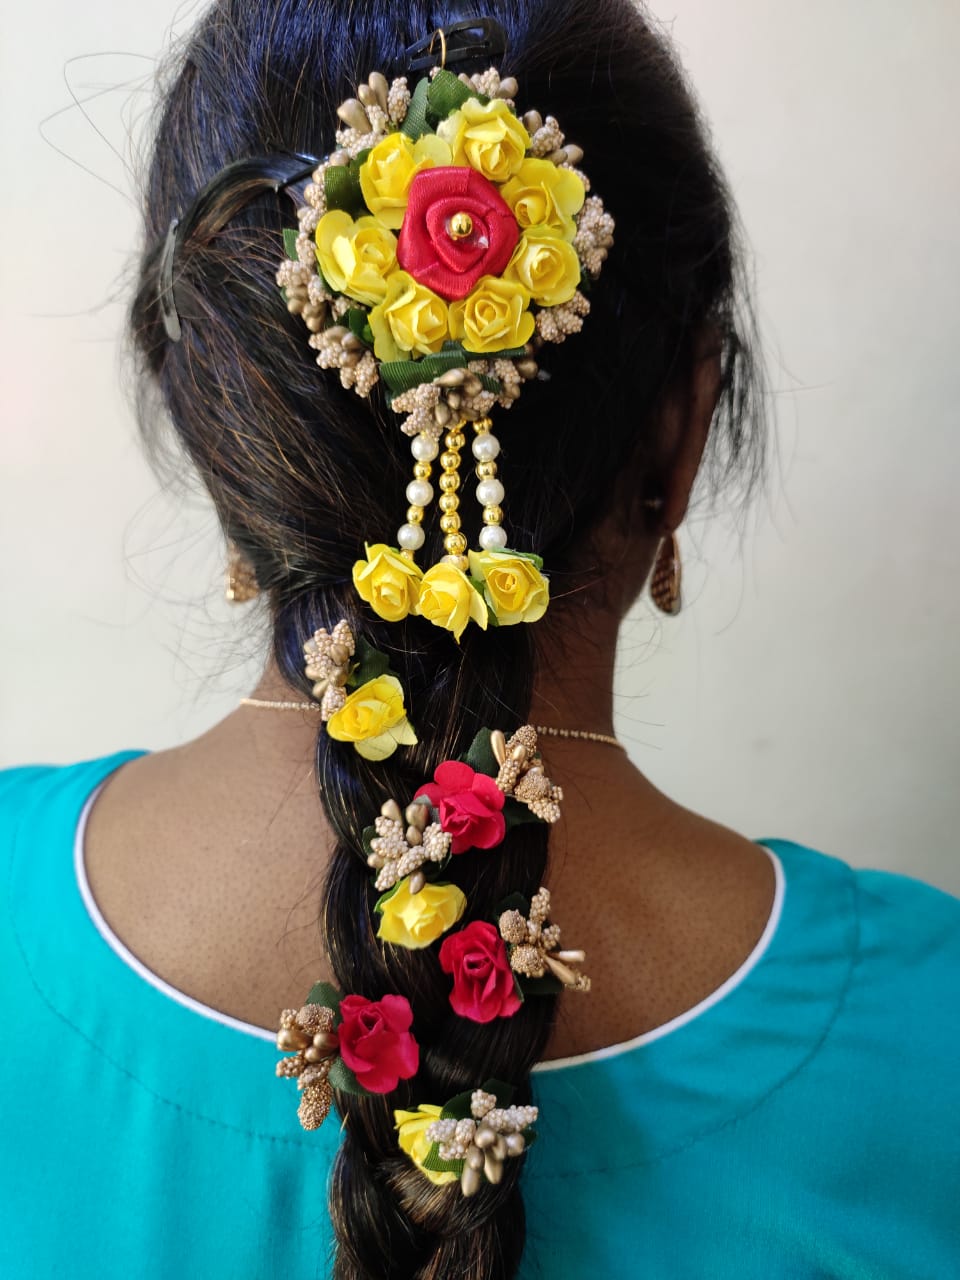 Buy Iyaan Pin Flower Gajra For Women And Girls Hair Styling Accessories For  Festival � Set Of 2 Online at Low Prices in India - Amazon.in